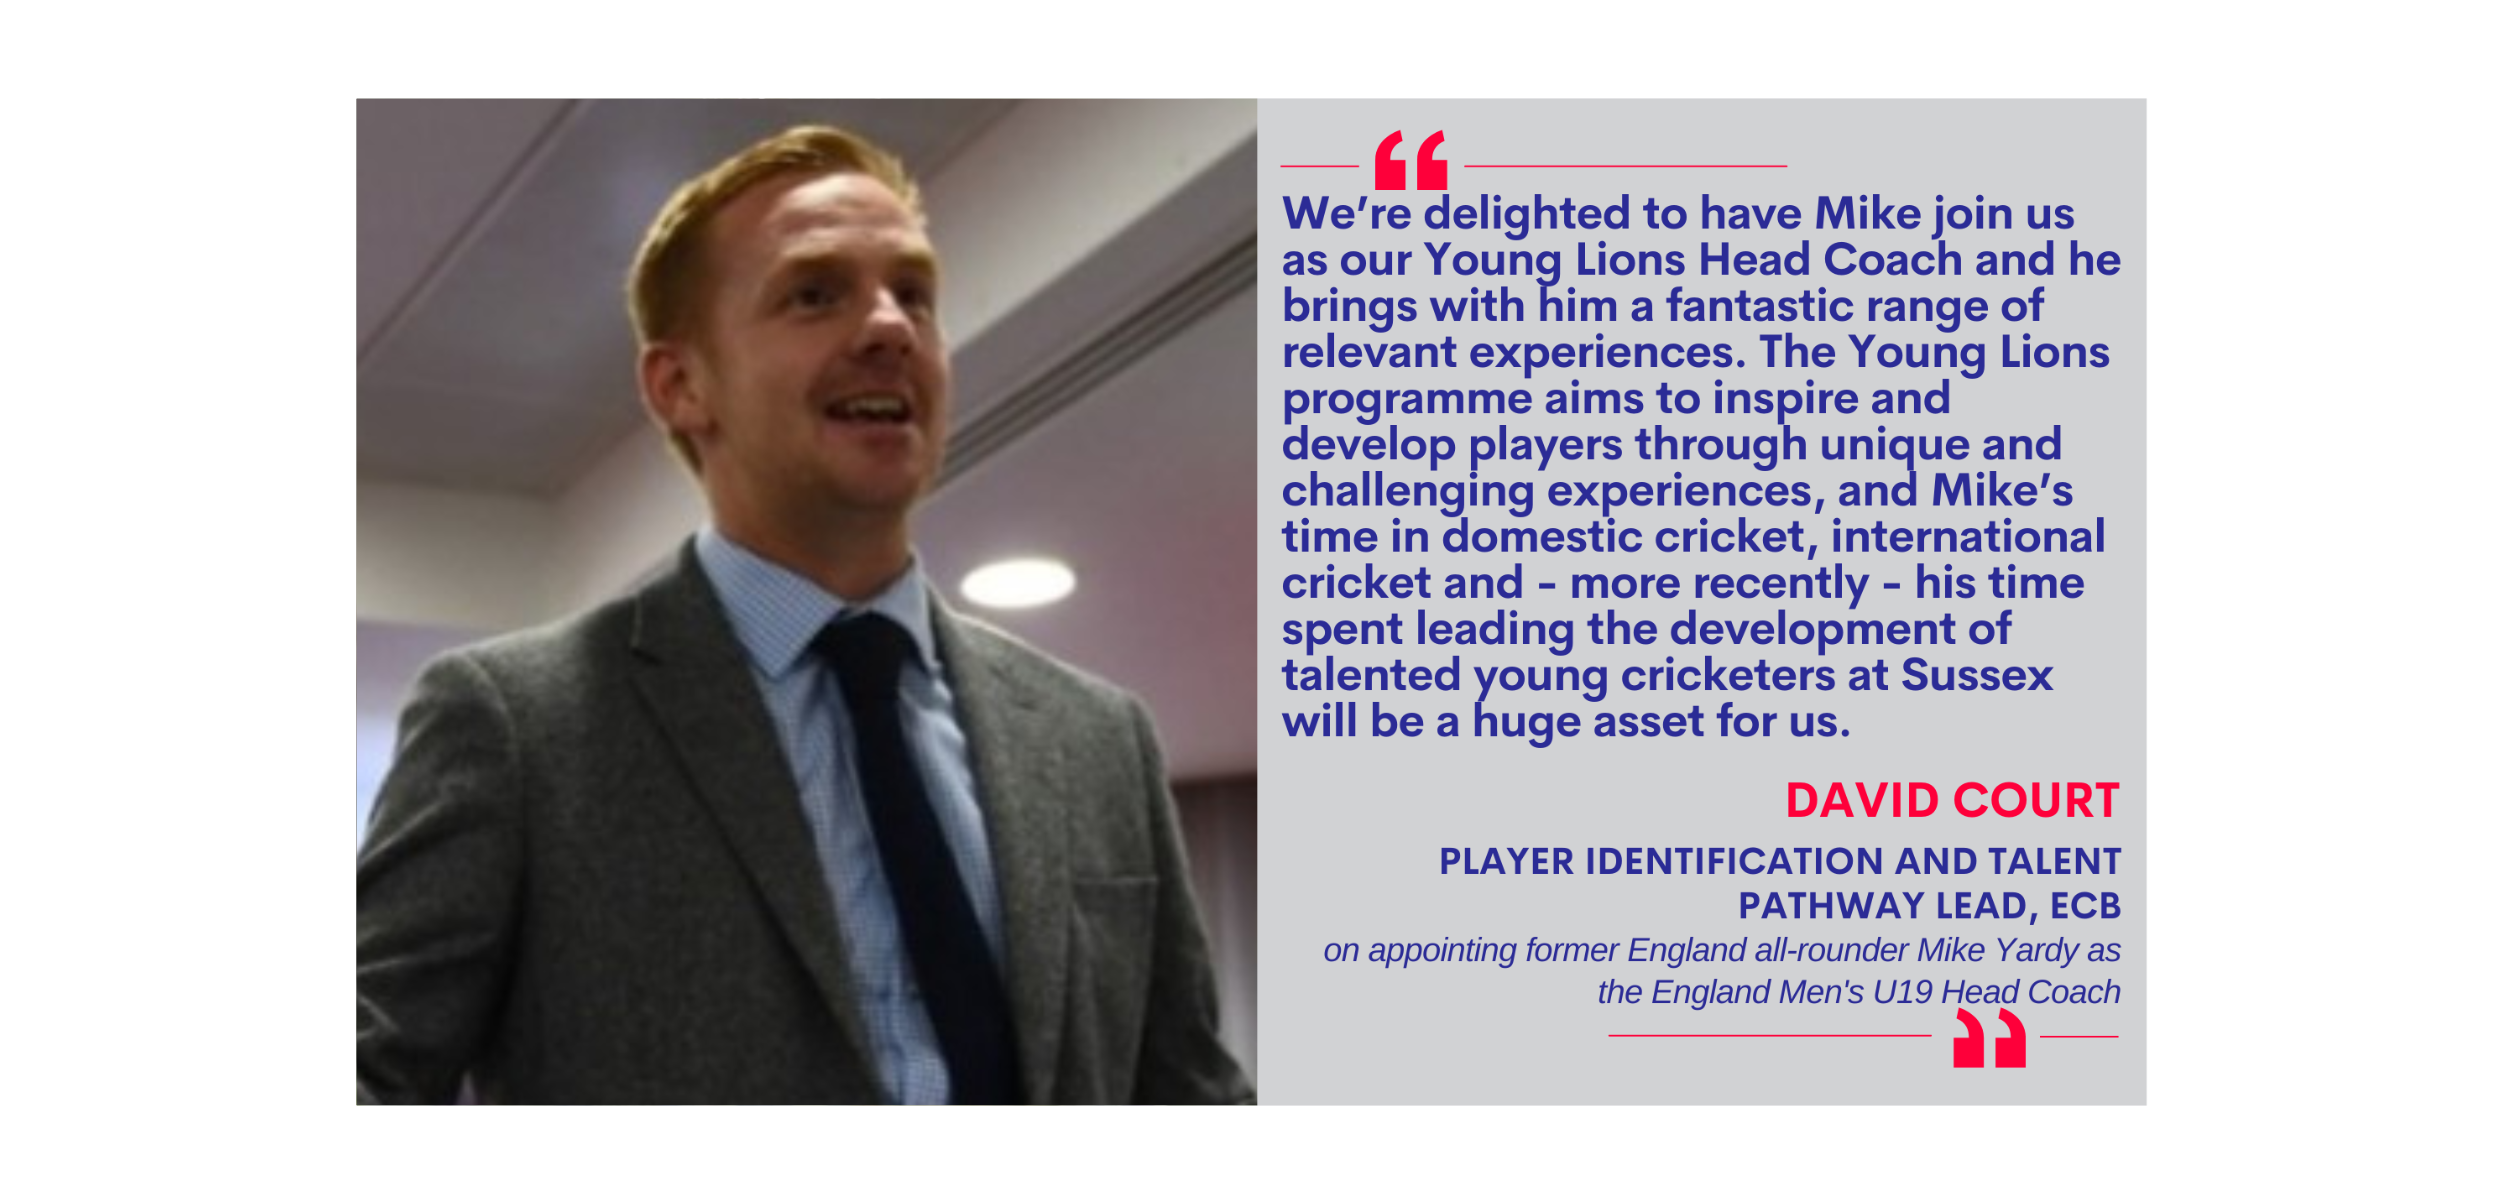 David Court, Player Identification and Talent Pathway Lead, ECB on October 27, 2022